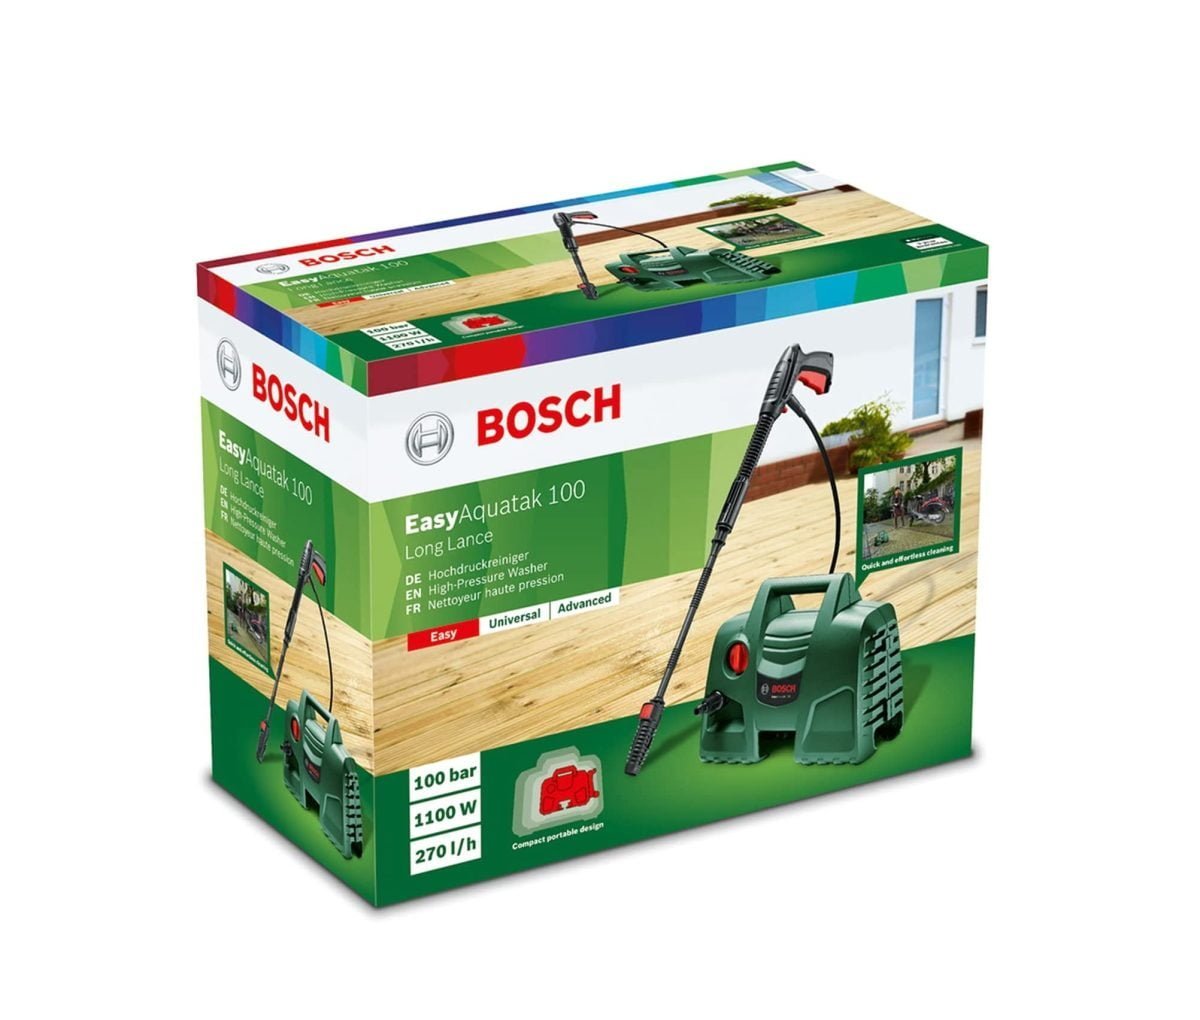 71Mmapy5El. Ac Sl1500 Bosch &Lt;H1 Class=&Quot;Product-Title&Quot;&Gt;Bosch Easyaquatak 100 Long Lance Pressure Washer (1200 W) 100 Bar&Lt;/H1&Gt; &Lt;Div Class=&Quot;Col-Sm-6 Col-Md-12&Quot;&Gt; &Lt;Div Class=&Quot;O-Pthg-Productstage__Product-Summary H6&Quot;&Gt; &Lt;Div Class=&Quot;O-Pthg-Productstage__Product-Summary H6&Quot;&Gt;Compact And Quick For Effortless Cleaning Performance&Lt;/Div&Gt; &Lt;Ul Class=&Quot;A-List A-List--Unordered&Quot;&Gt; &Lt;Li Class=&Quot;A-List__Item&Quot;&Gt; &Lt;Div Class=&Quot;A-Text-Richtext&Quot;&Gt;Compact Design Allows Easy Maneuverability For Quick Cleaning Job&Lt;/Div&Gt;&Lt;/Li&Gt; &Lt;Li Class=&Quot;A-List__Item&Quot;&Gt; &Lt;Div Class=&Quot;A-Text-Richtext&Quot;&Gt;Adjustable Nozzle – From A Forceful Jet To Gentle Rinsing&Lt;/Div&Gt;&Lt;/Li&Gt; &Lt;Li Class=&Quot;A-List__Item&Quot;&Gt; &Lt;Div Class=&Quot;A-Text-Richtext&Quot;&Gt;Push-Fit Connections For Ultimate Convenience&Lt;/Div&Gt;&Lt;/Li&Gt; &Lt;Li Class=&Quot;A-List__Item&Quot;&Gt; &Lt;Div Class=&Quot;A-Text-Richtext&Quot;&Gt;Easily Tackle Small-To-Medium-Sized Cleaning Tasks&Lt;/Div&Gt;&Lt;/Li&Gt; &Lt;/Ul&Gt; Model 00600 8A7 E71 Is &Lt;/Div&Gt; &Lt;/Div&Gt; Bosch Easyaquatak 100 Long Lance Pressure Washer (1200 W) 100 Bar